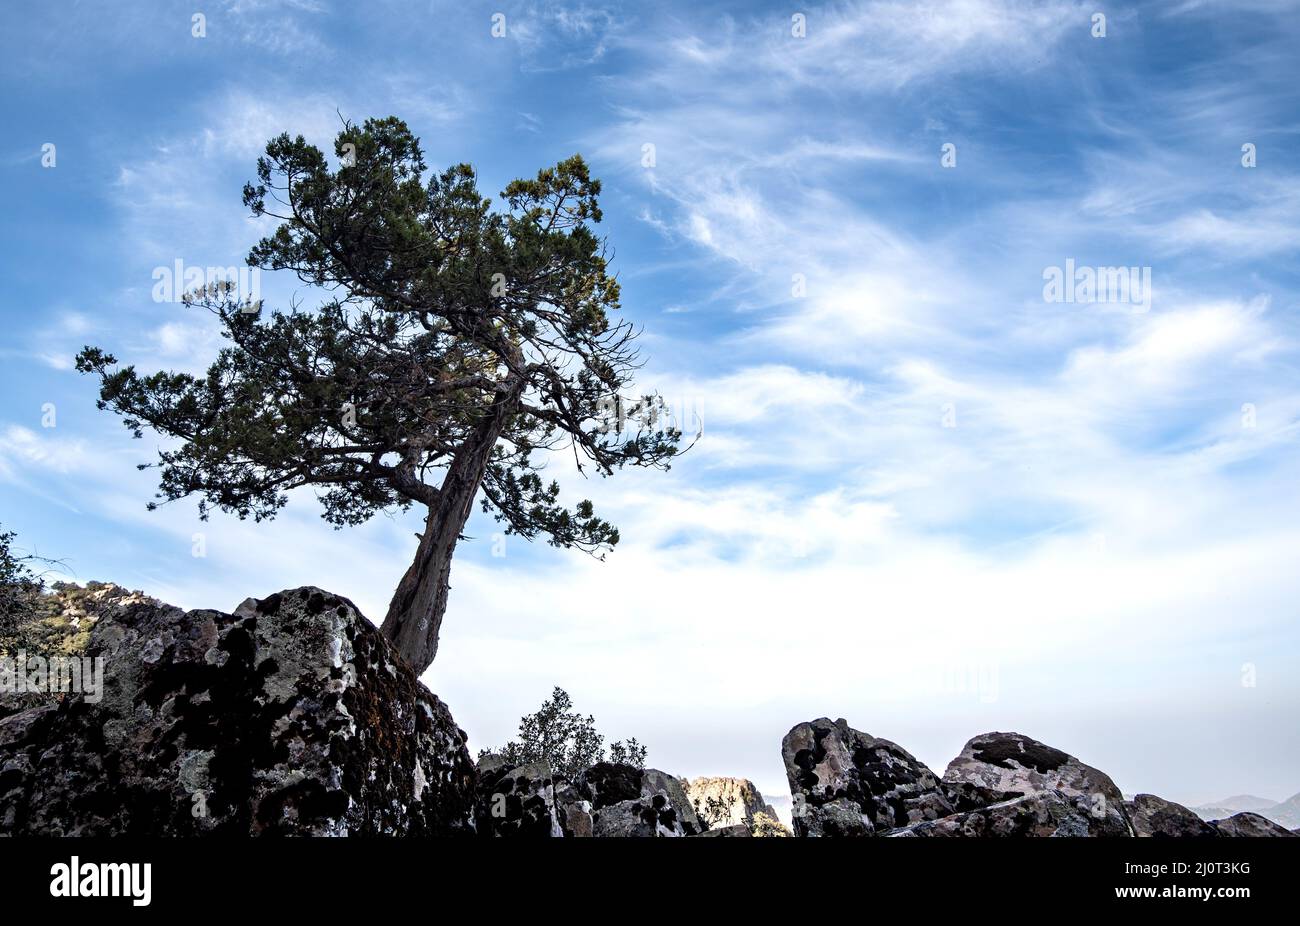 Lonely pine coniferous tree in forest isolated on blue cloudy sky. Nature landscape copy space. Stock Photo